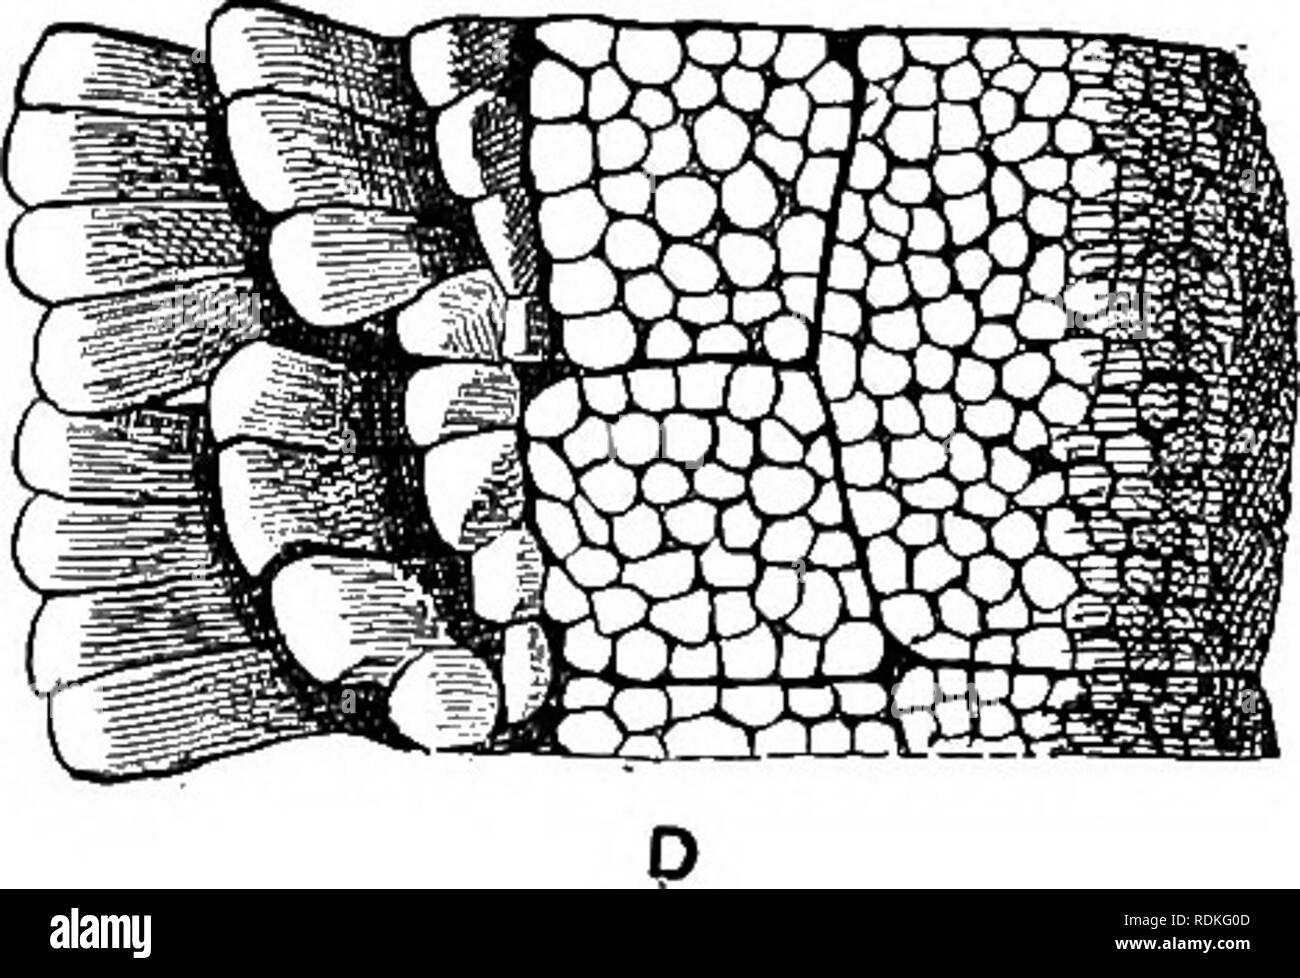 . The Cambridge natural history. Zoology. 7 .. V . C, â¢ â â¢ A W^^^iJ'M^^ ^S ^S ^^^^^ ^^Mf^M^^^akk. Fig. 194.âViews of portions of the aboral surface of different genera of Asteroidea in order to show the main varieties of skeleton. A, Solasler, showing spines arranged in sheaves ; B, Pteraster, showing wehs forming supra-dorsal membrane supported by diverging spines ; C, Astropecten, showing paxillae ; D, Nardoa, showing uniform plating of granules. x 8. (After Sladen.) dorsal tent is formed (a structure characteristic of the Pter- asteridae), or (2) the members of a sheaf may become arrange Stock Photo